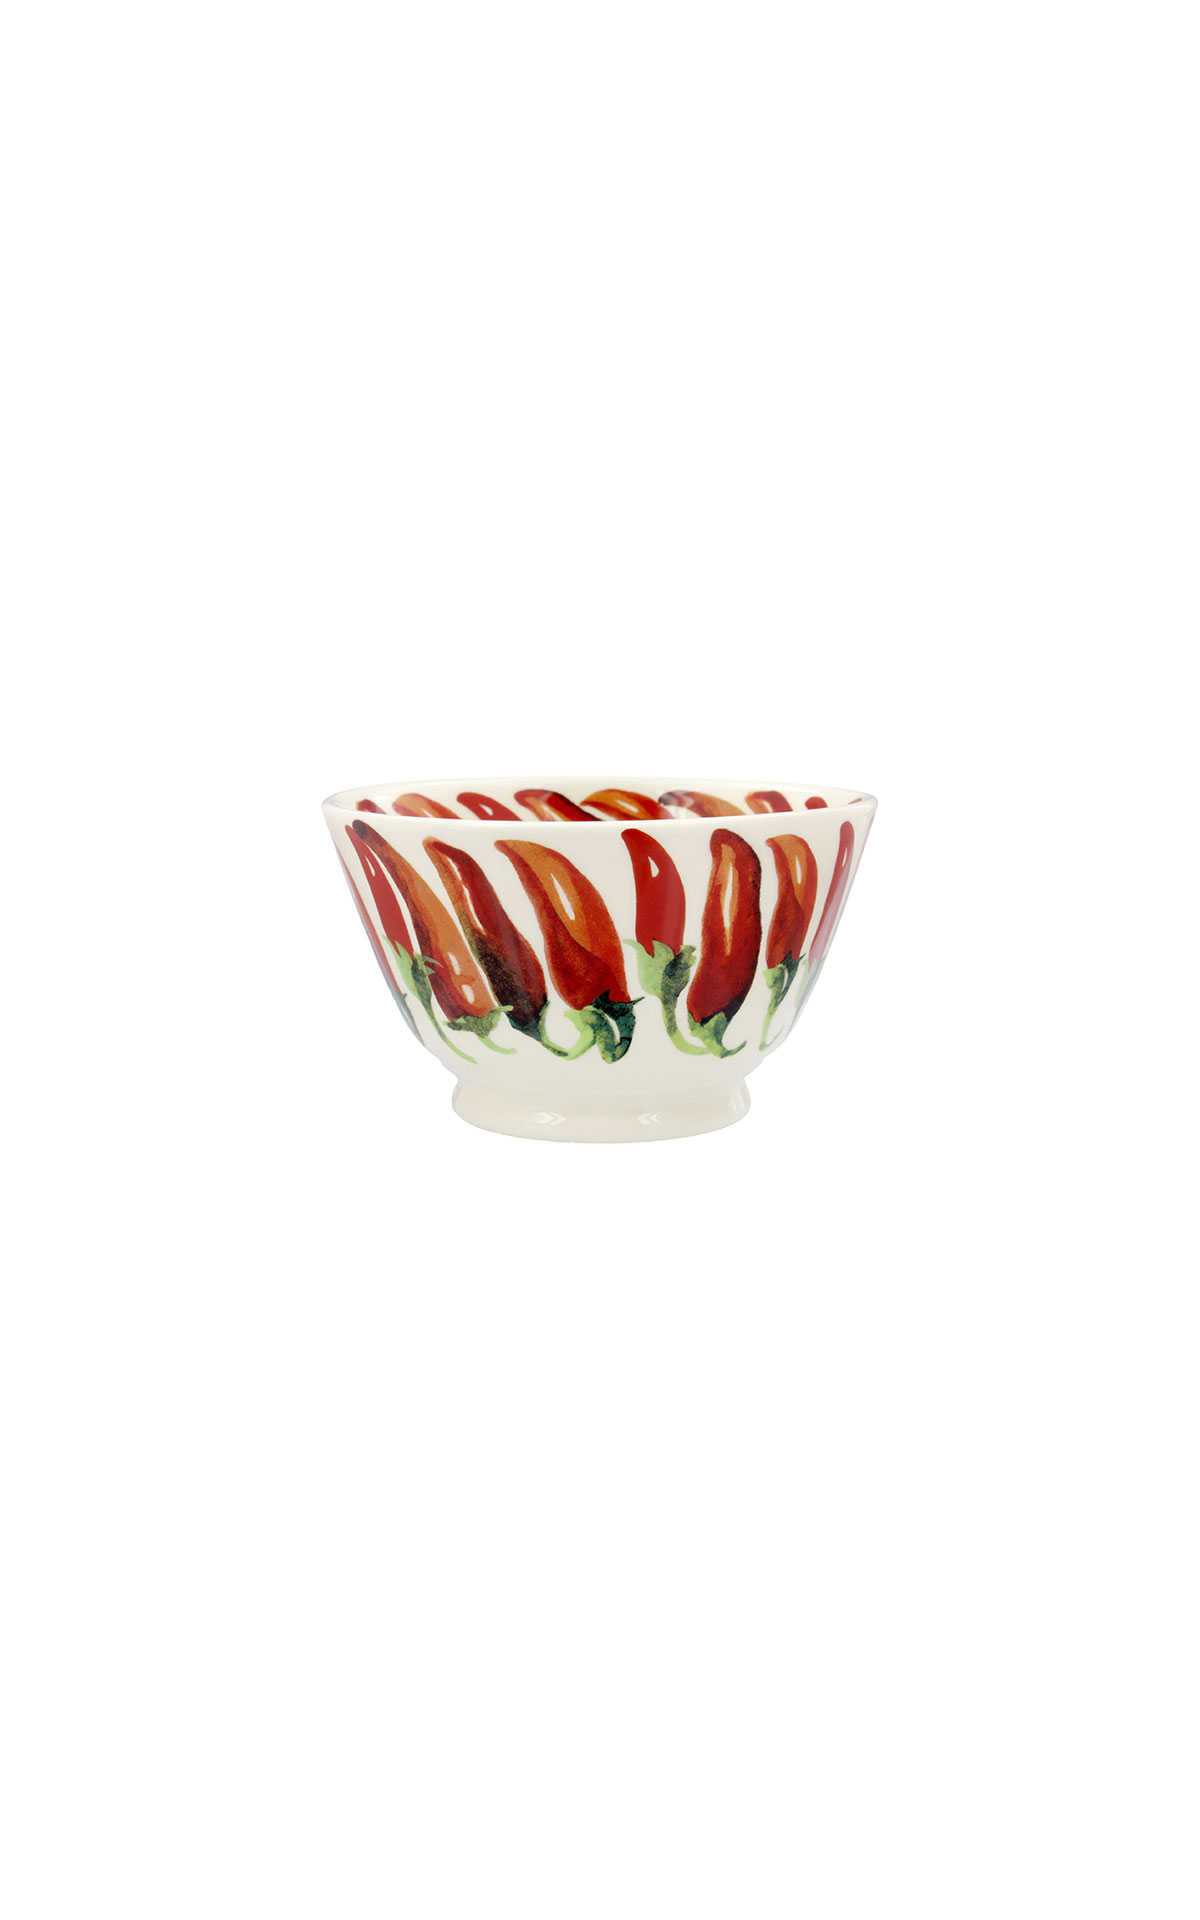 Emma Bridgewater Chillies small old bowl from Bicester Village